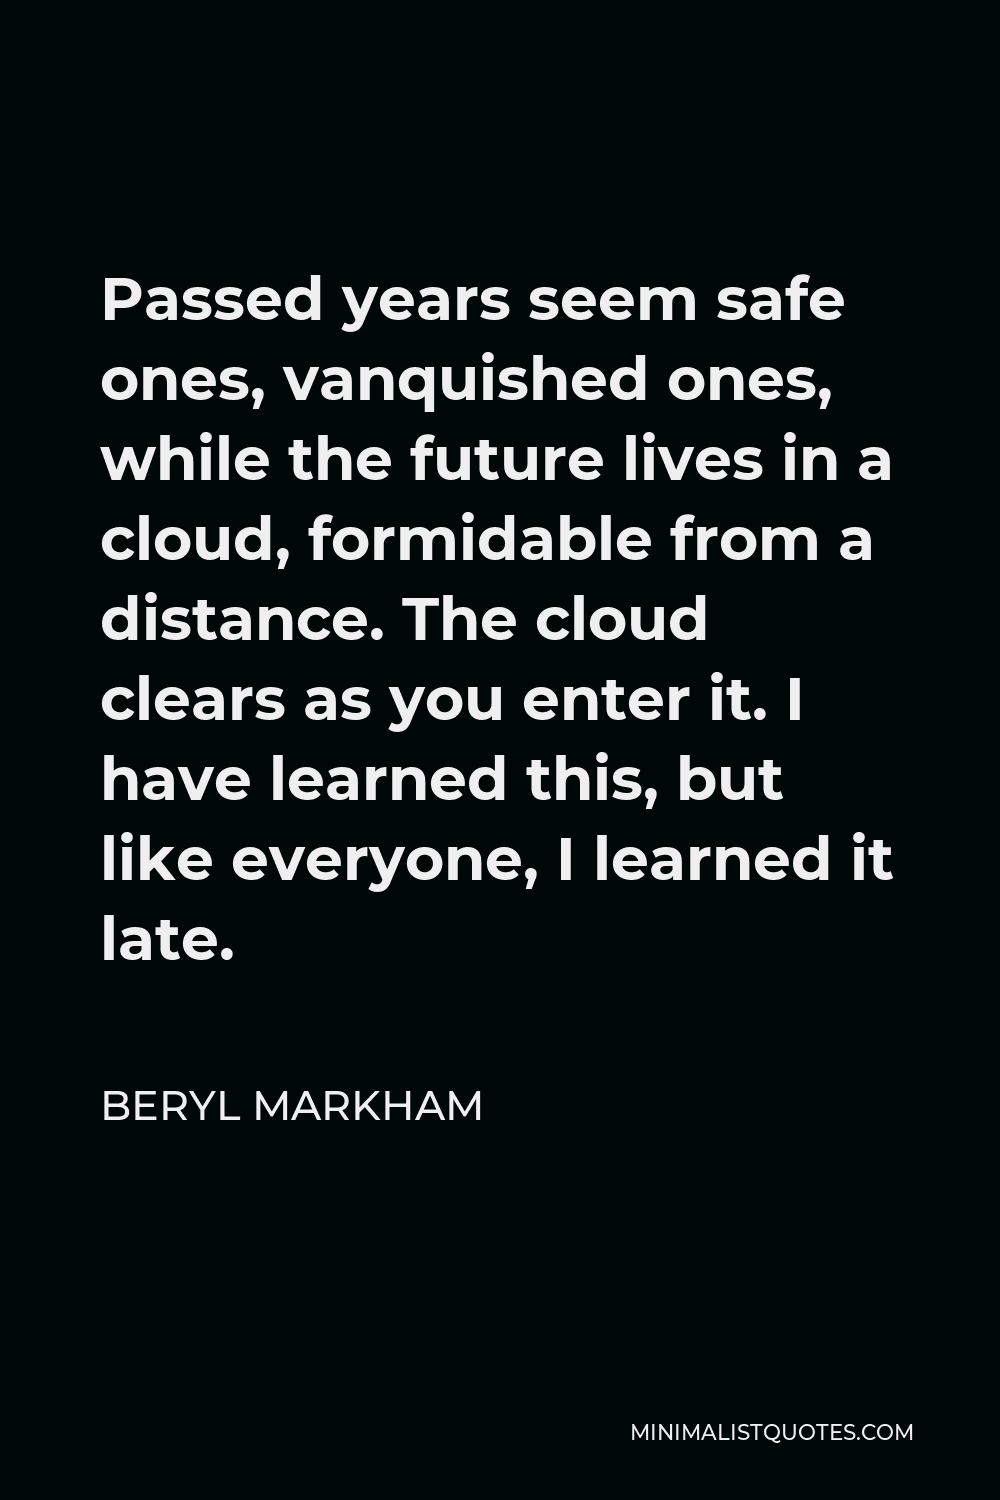 Beryl Markham Quote - Passed years seem safe ones, vanquished ones, while the future lives in a cloud, formidable from a distance. The cloud clears as you enter it. I have learned this, but like everyone, I learned it late.